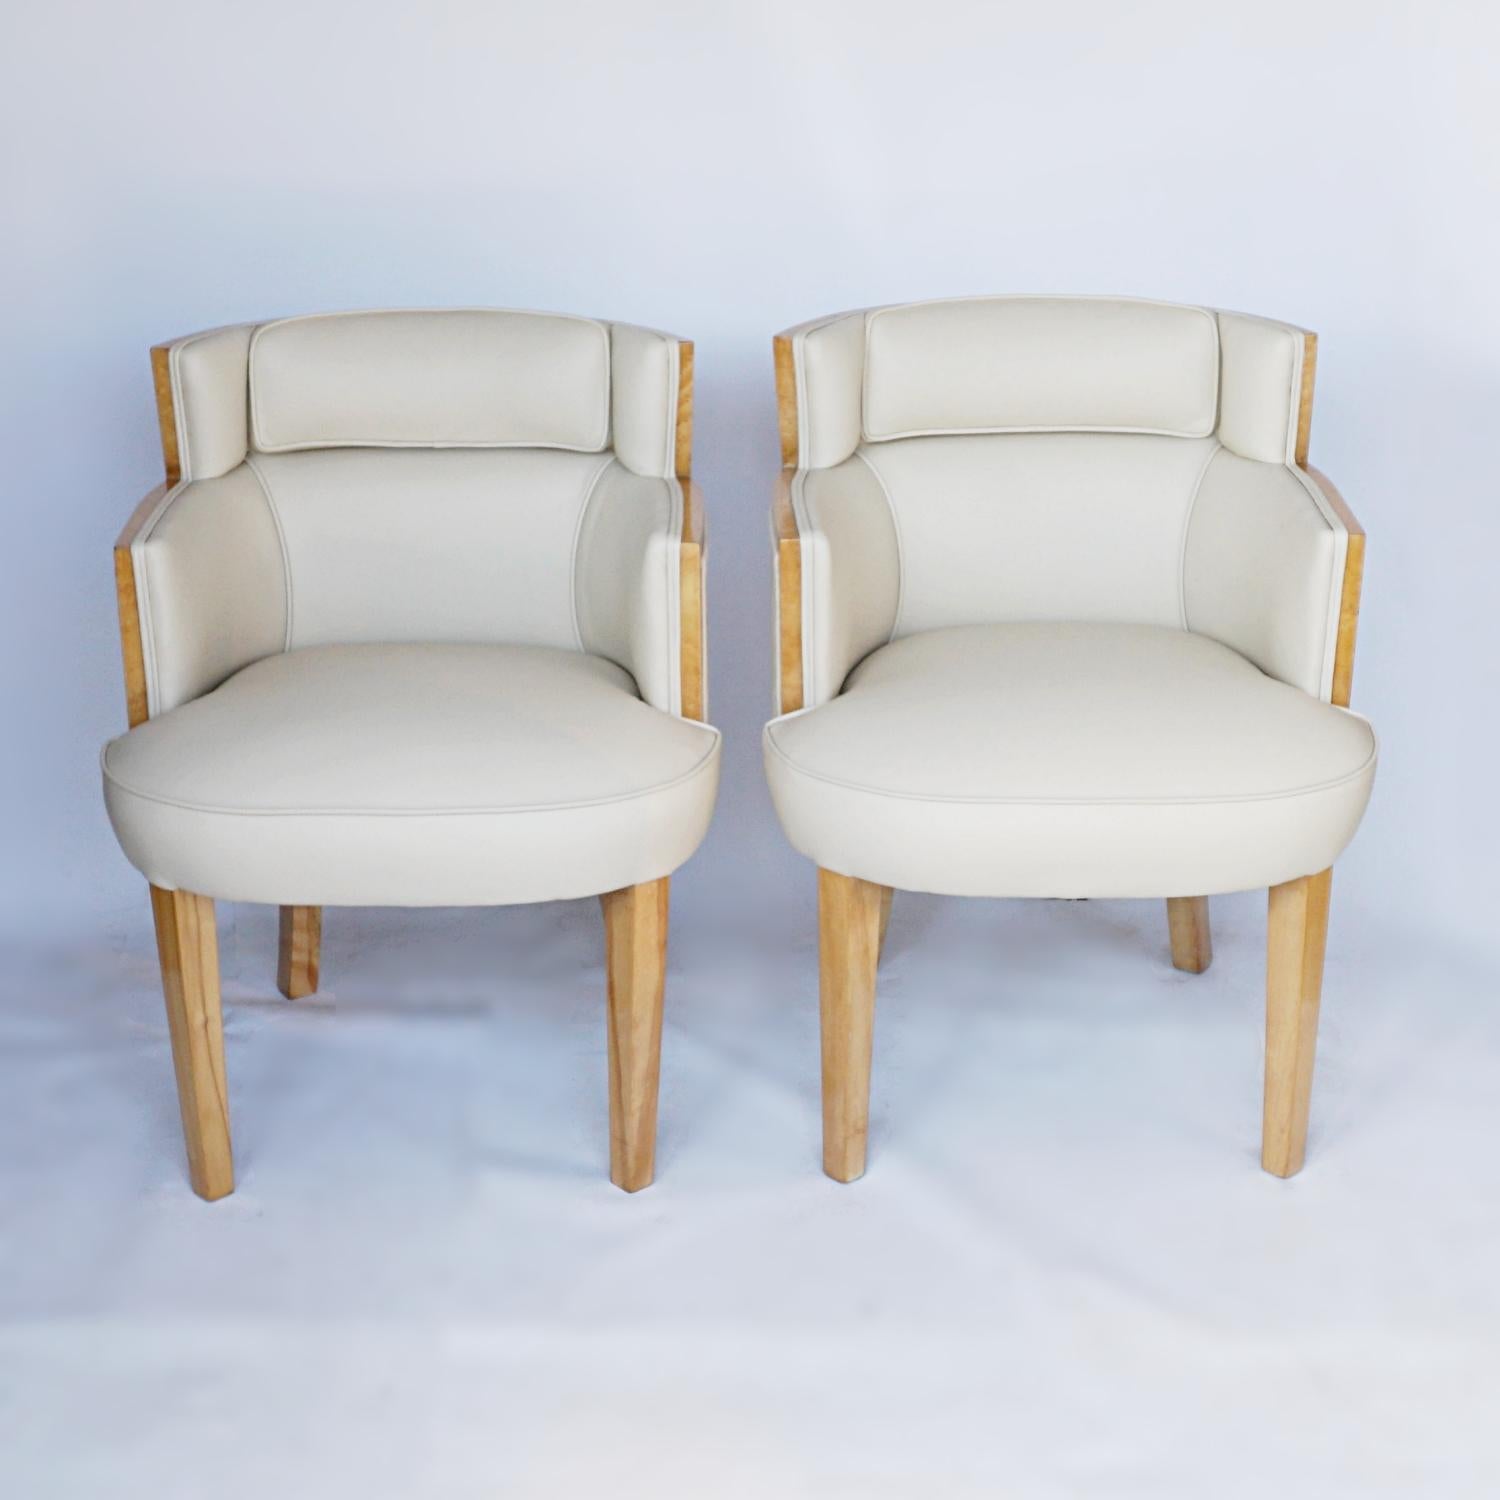 Leather Pair of Art Deco Bankers Chairs English, Circa 1935